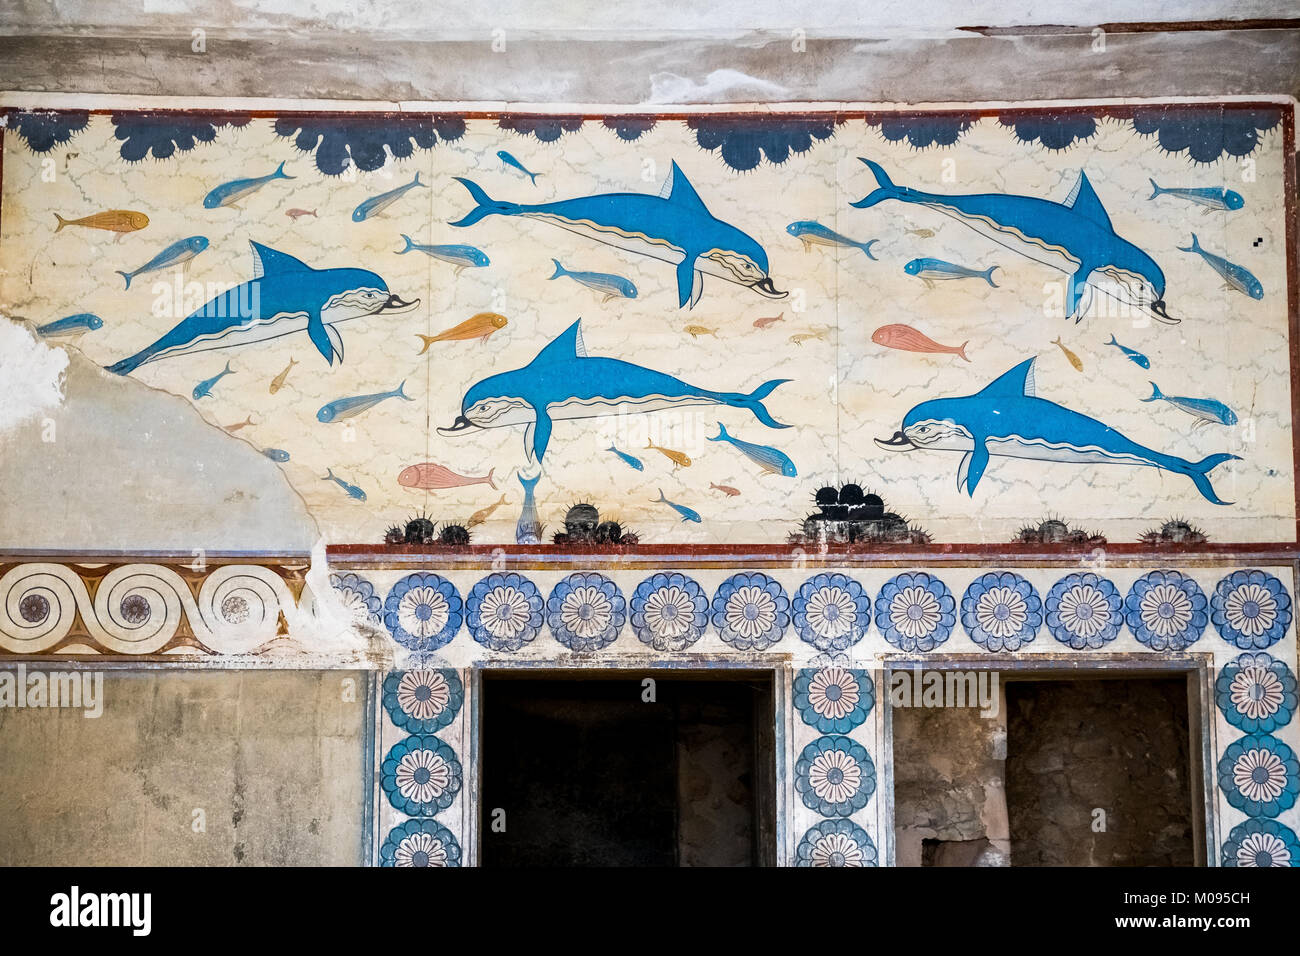 Reconstruction of Dolphin frescoes by Arthur Evans, Megaron the King and pillared vestibule in the palace of Knossos, Knossos, Minoan archaeological s Stock Photo